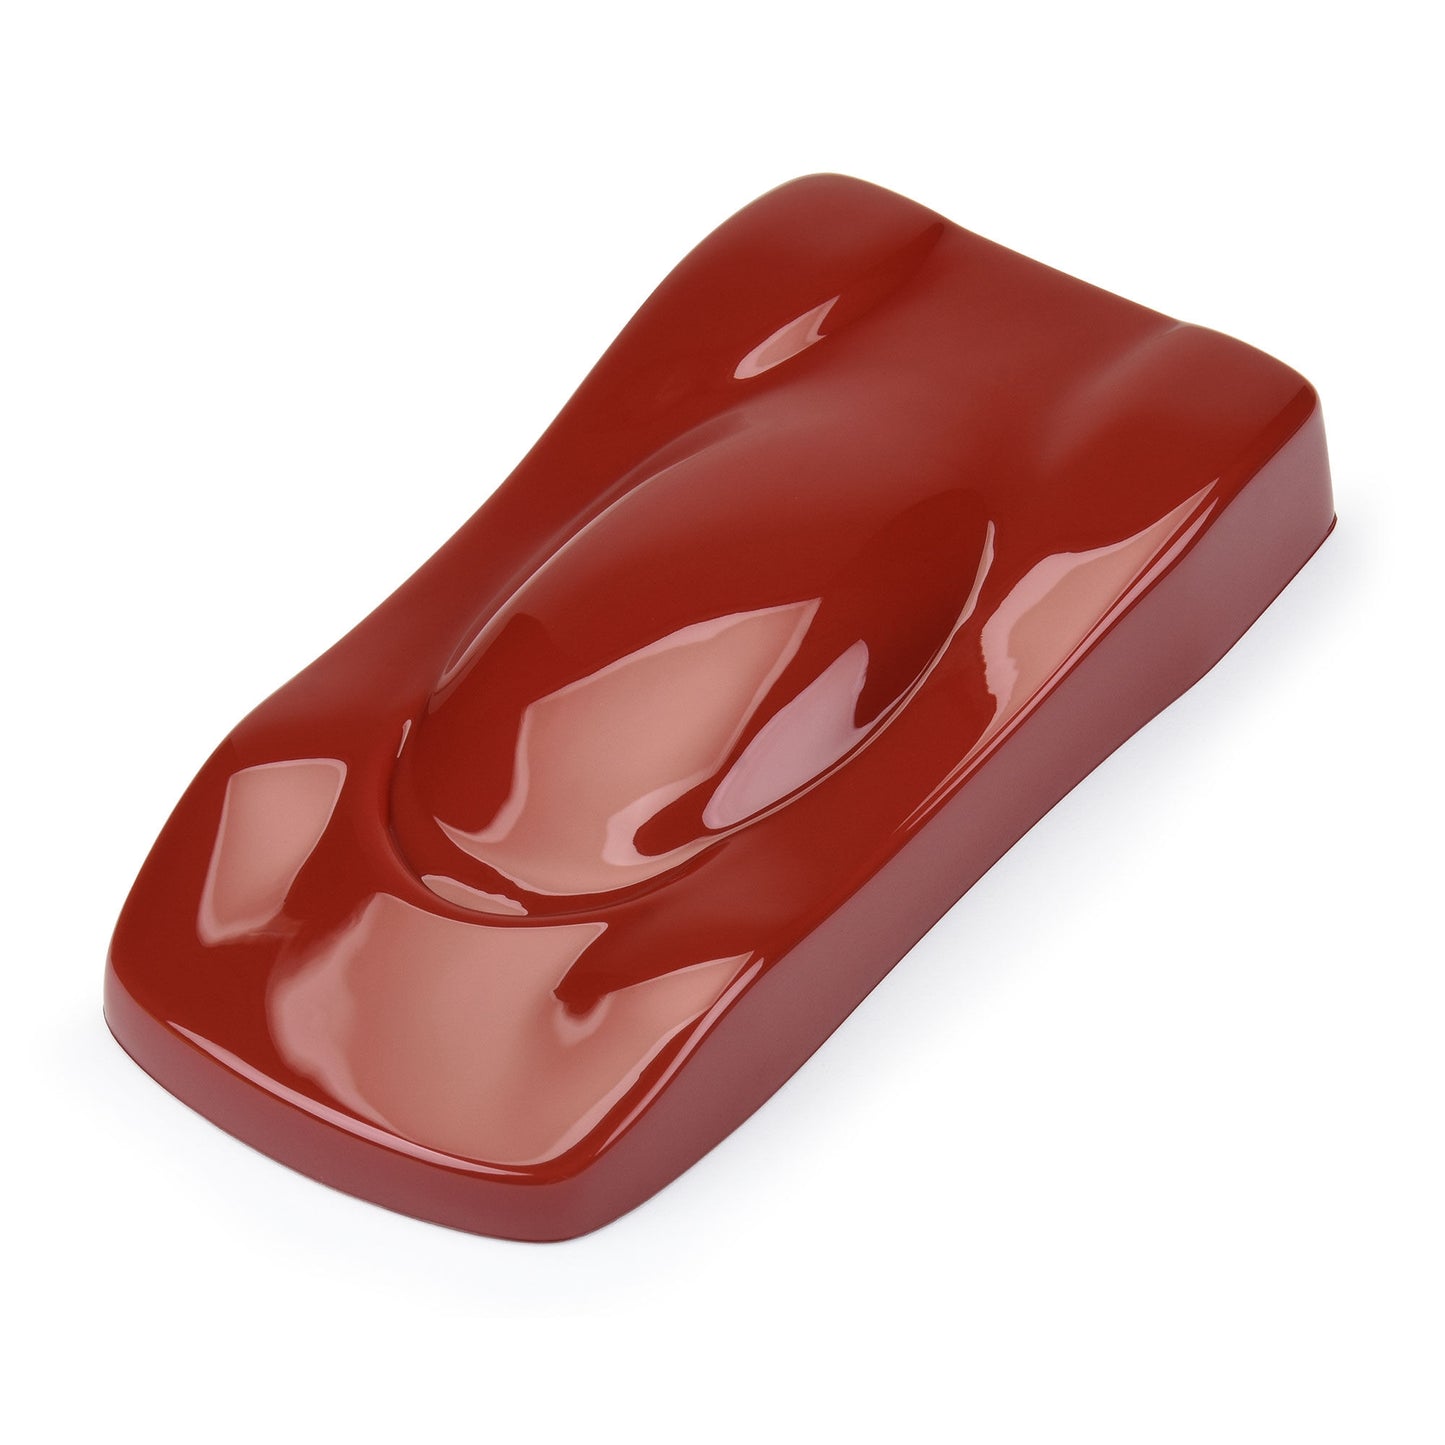 RC Car Body Paint - Mars Red Oxide